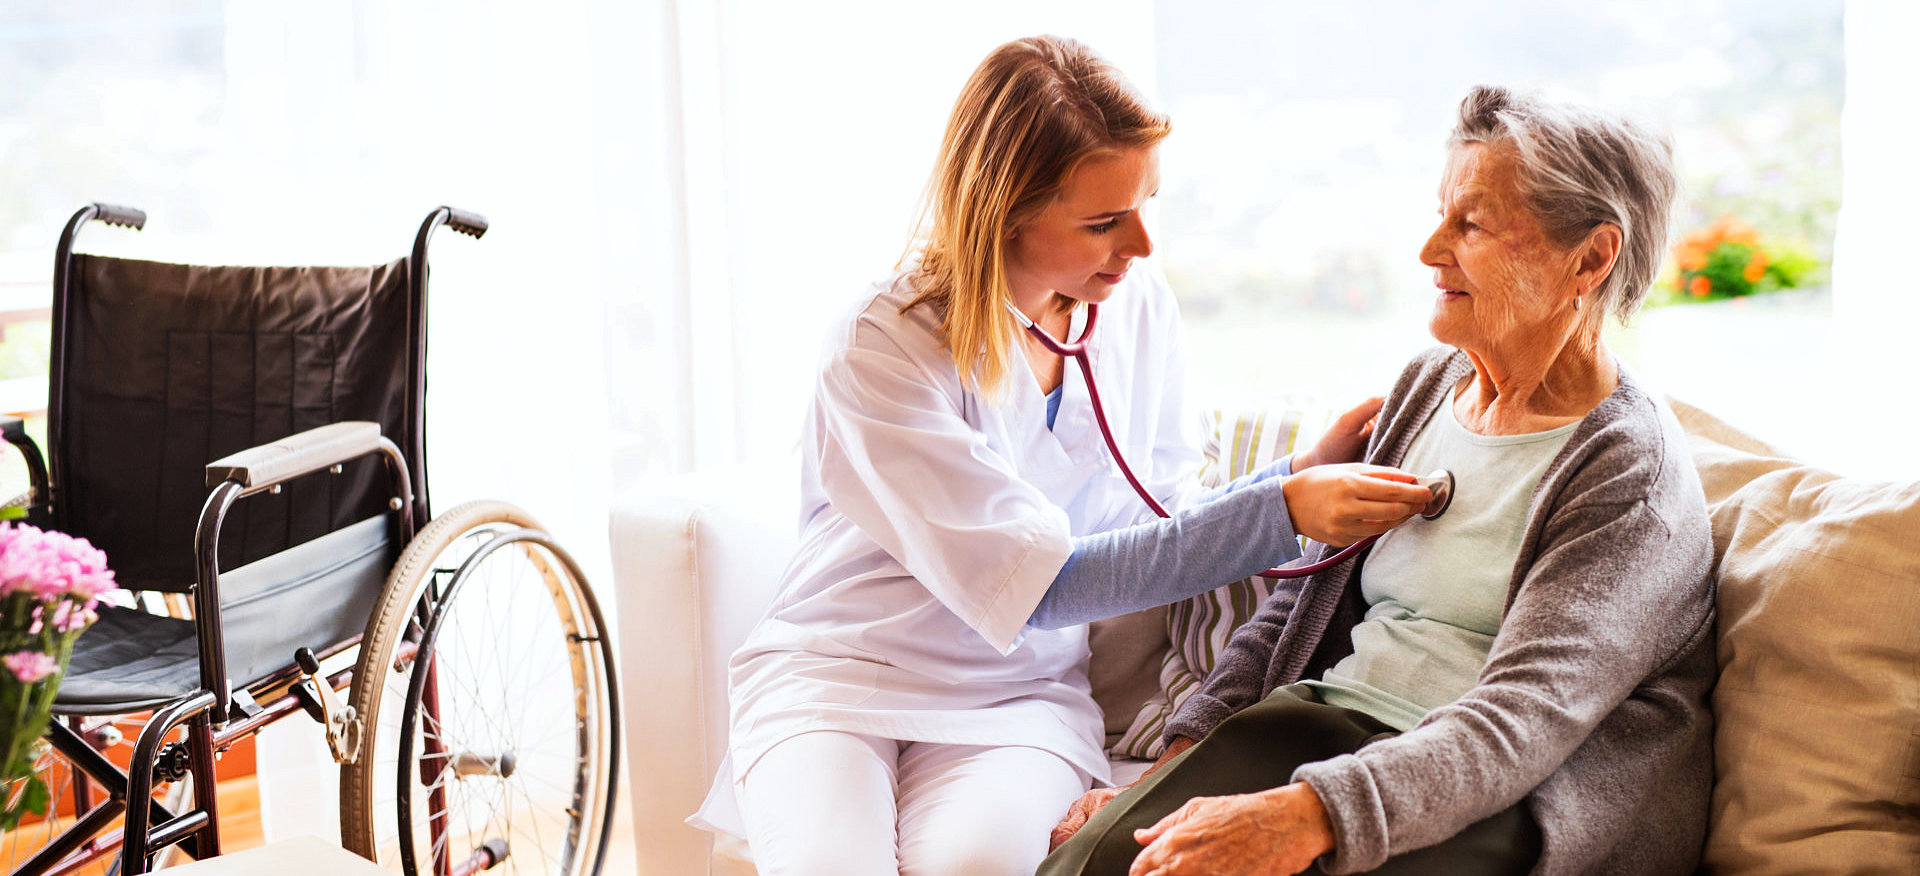 Caring Hearts Homecare: Home Health Care in MA